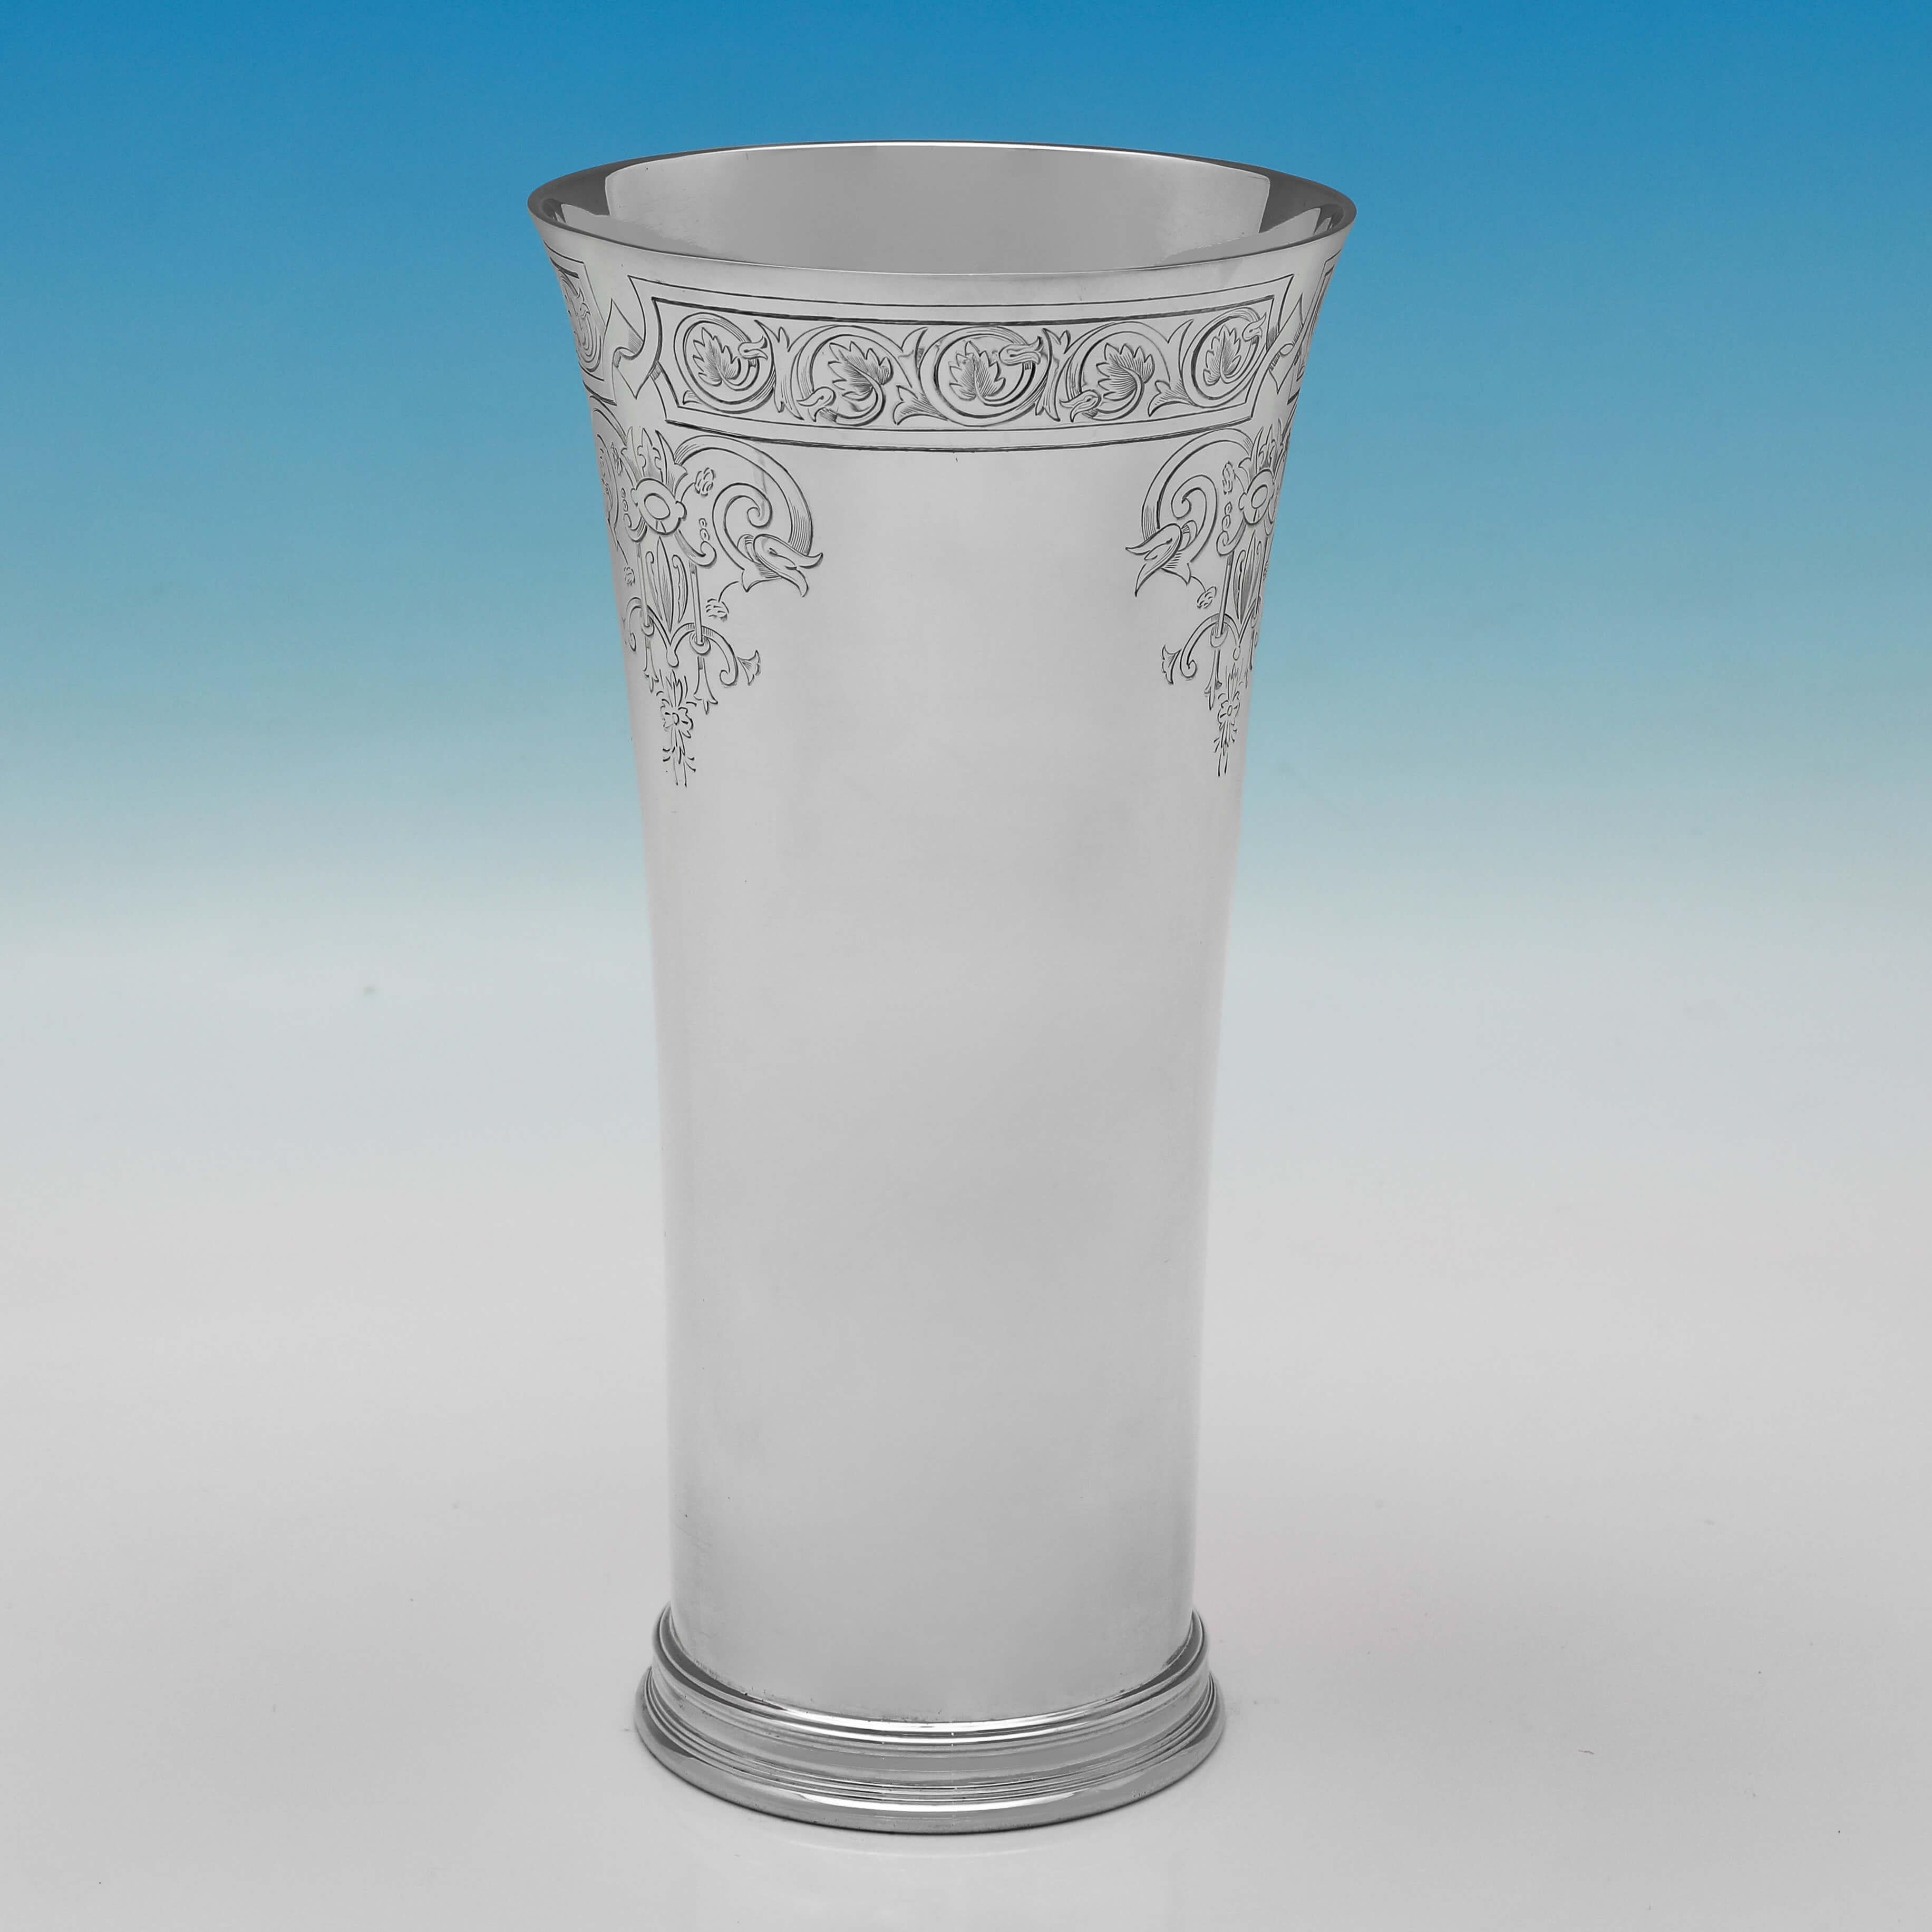 Hallmarked in London in 1932 by Richard Comyns, this stylish, Sterling Silver Vase, features engraved decoration around the rim, and a stepped base. 

The vase measures 9